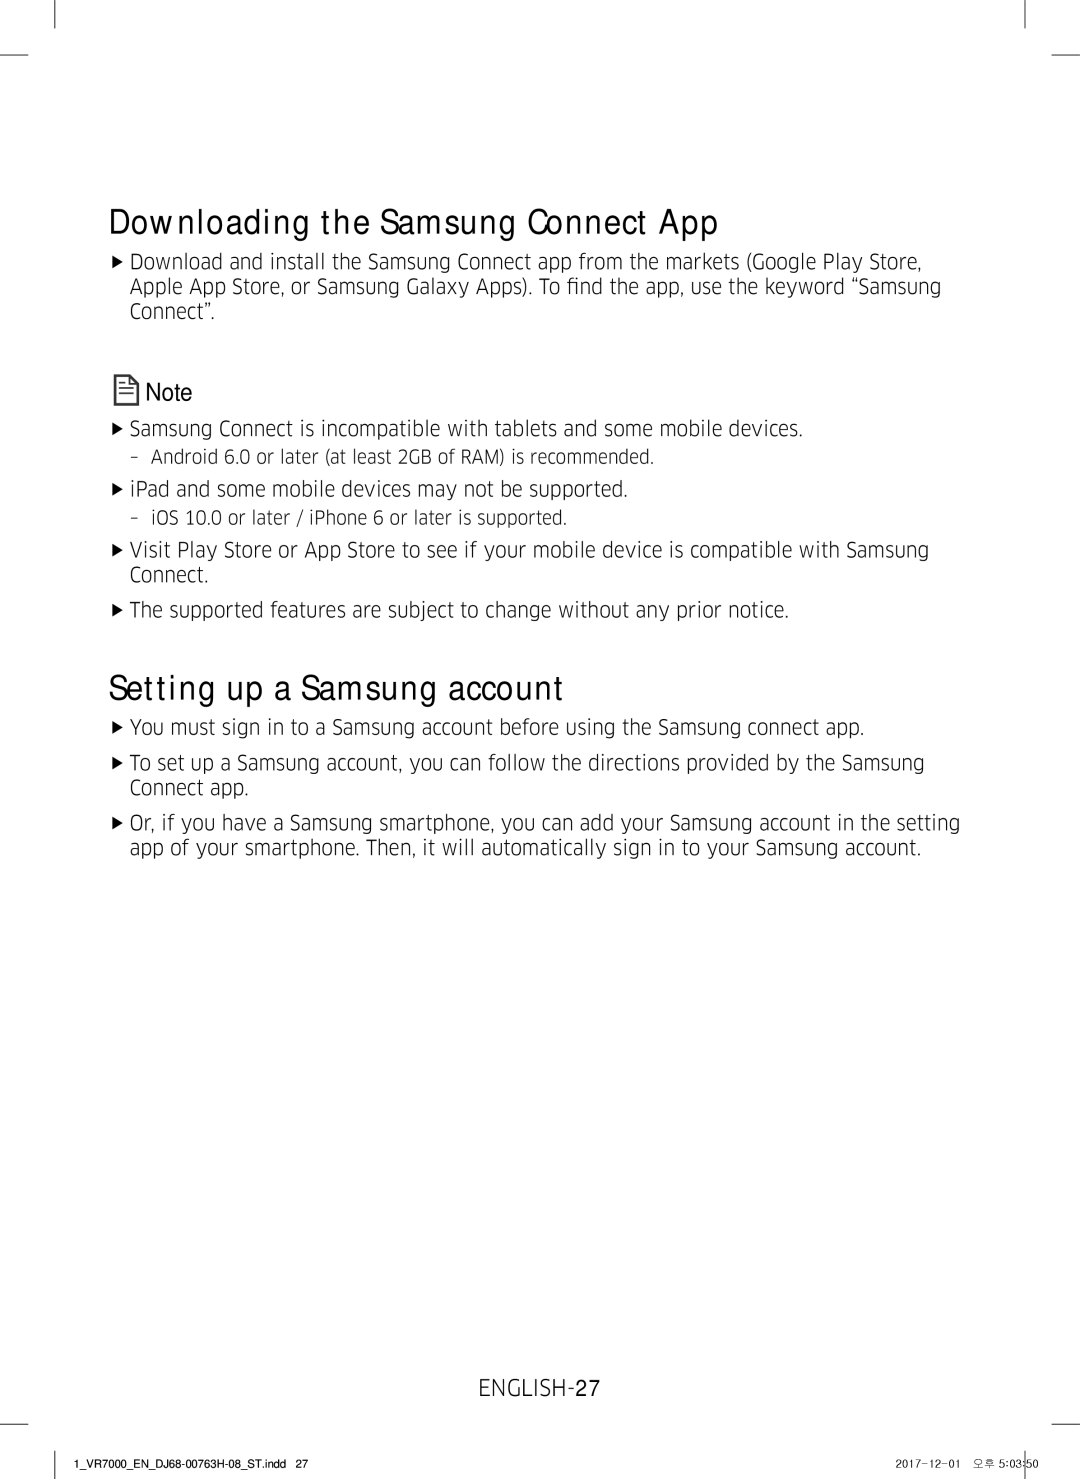 Samsung VR10M7030WG/ST, VR10M7020UW/ML, VR10M7020UW/TW manual Downloading the Samsung Connect App 